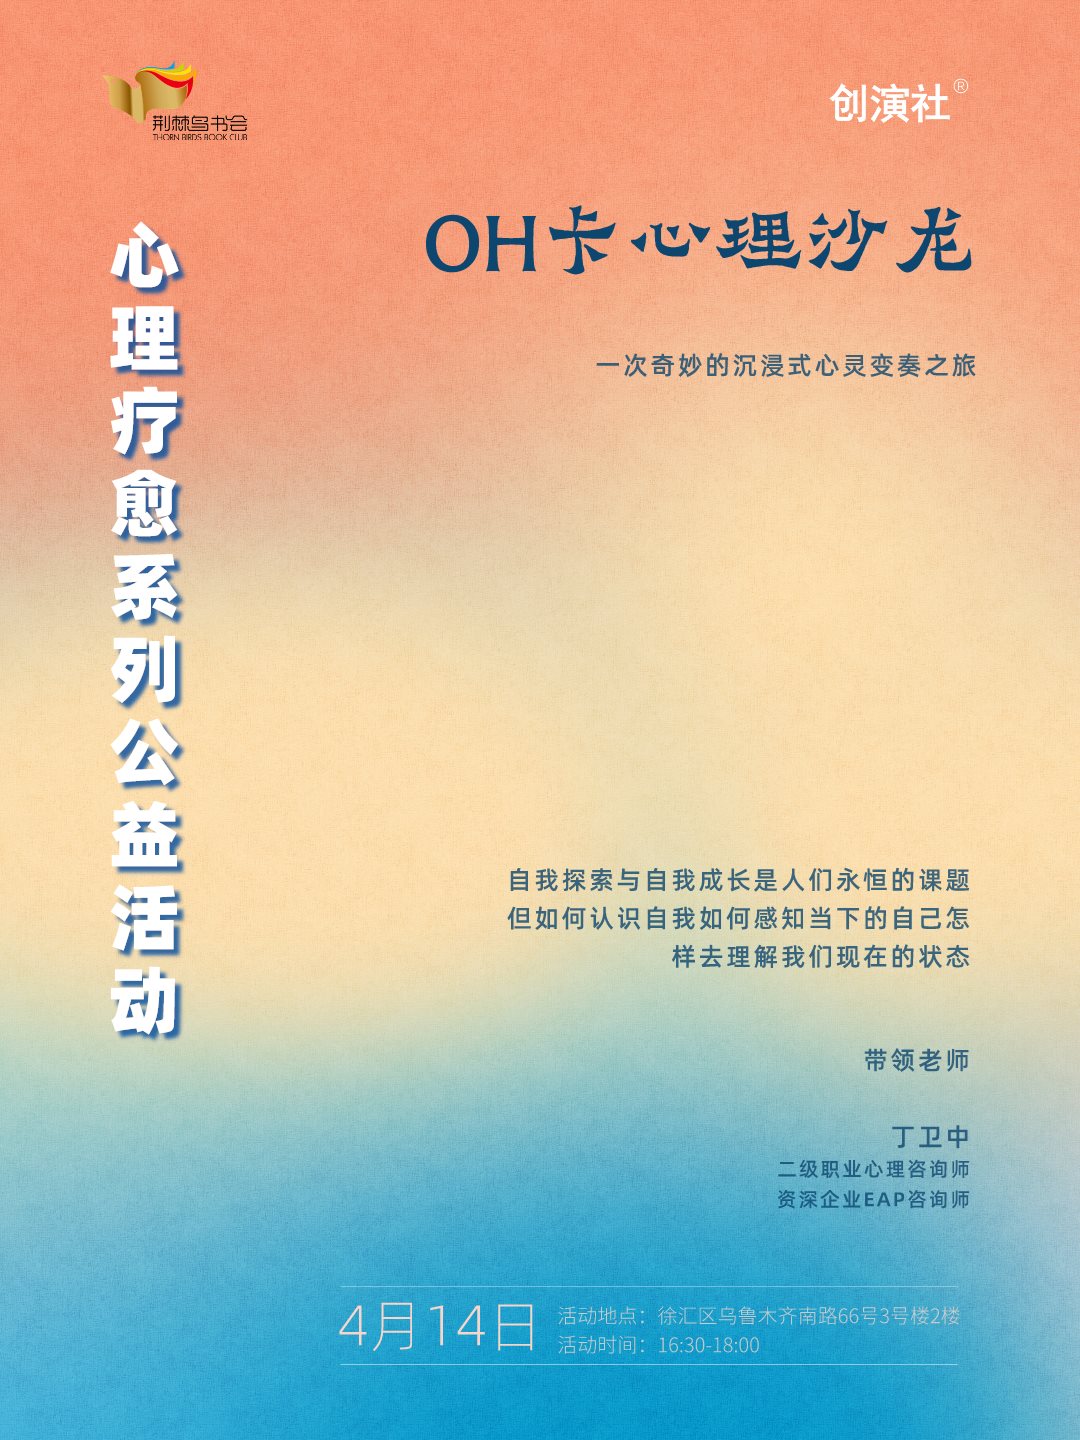 OH卡沙龙__1.png